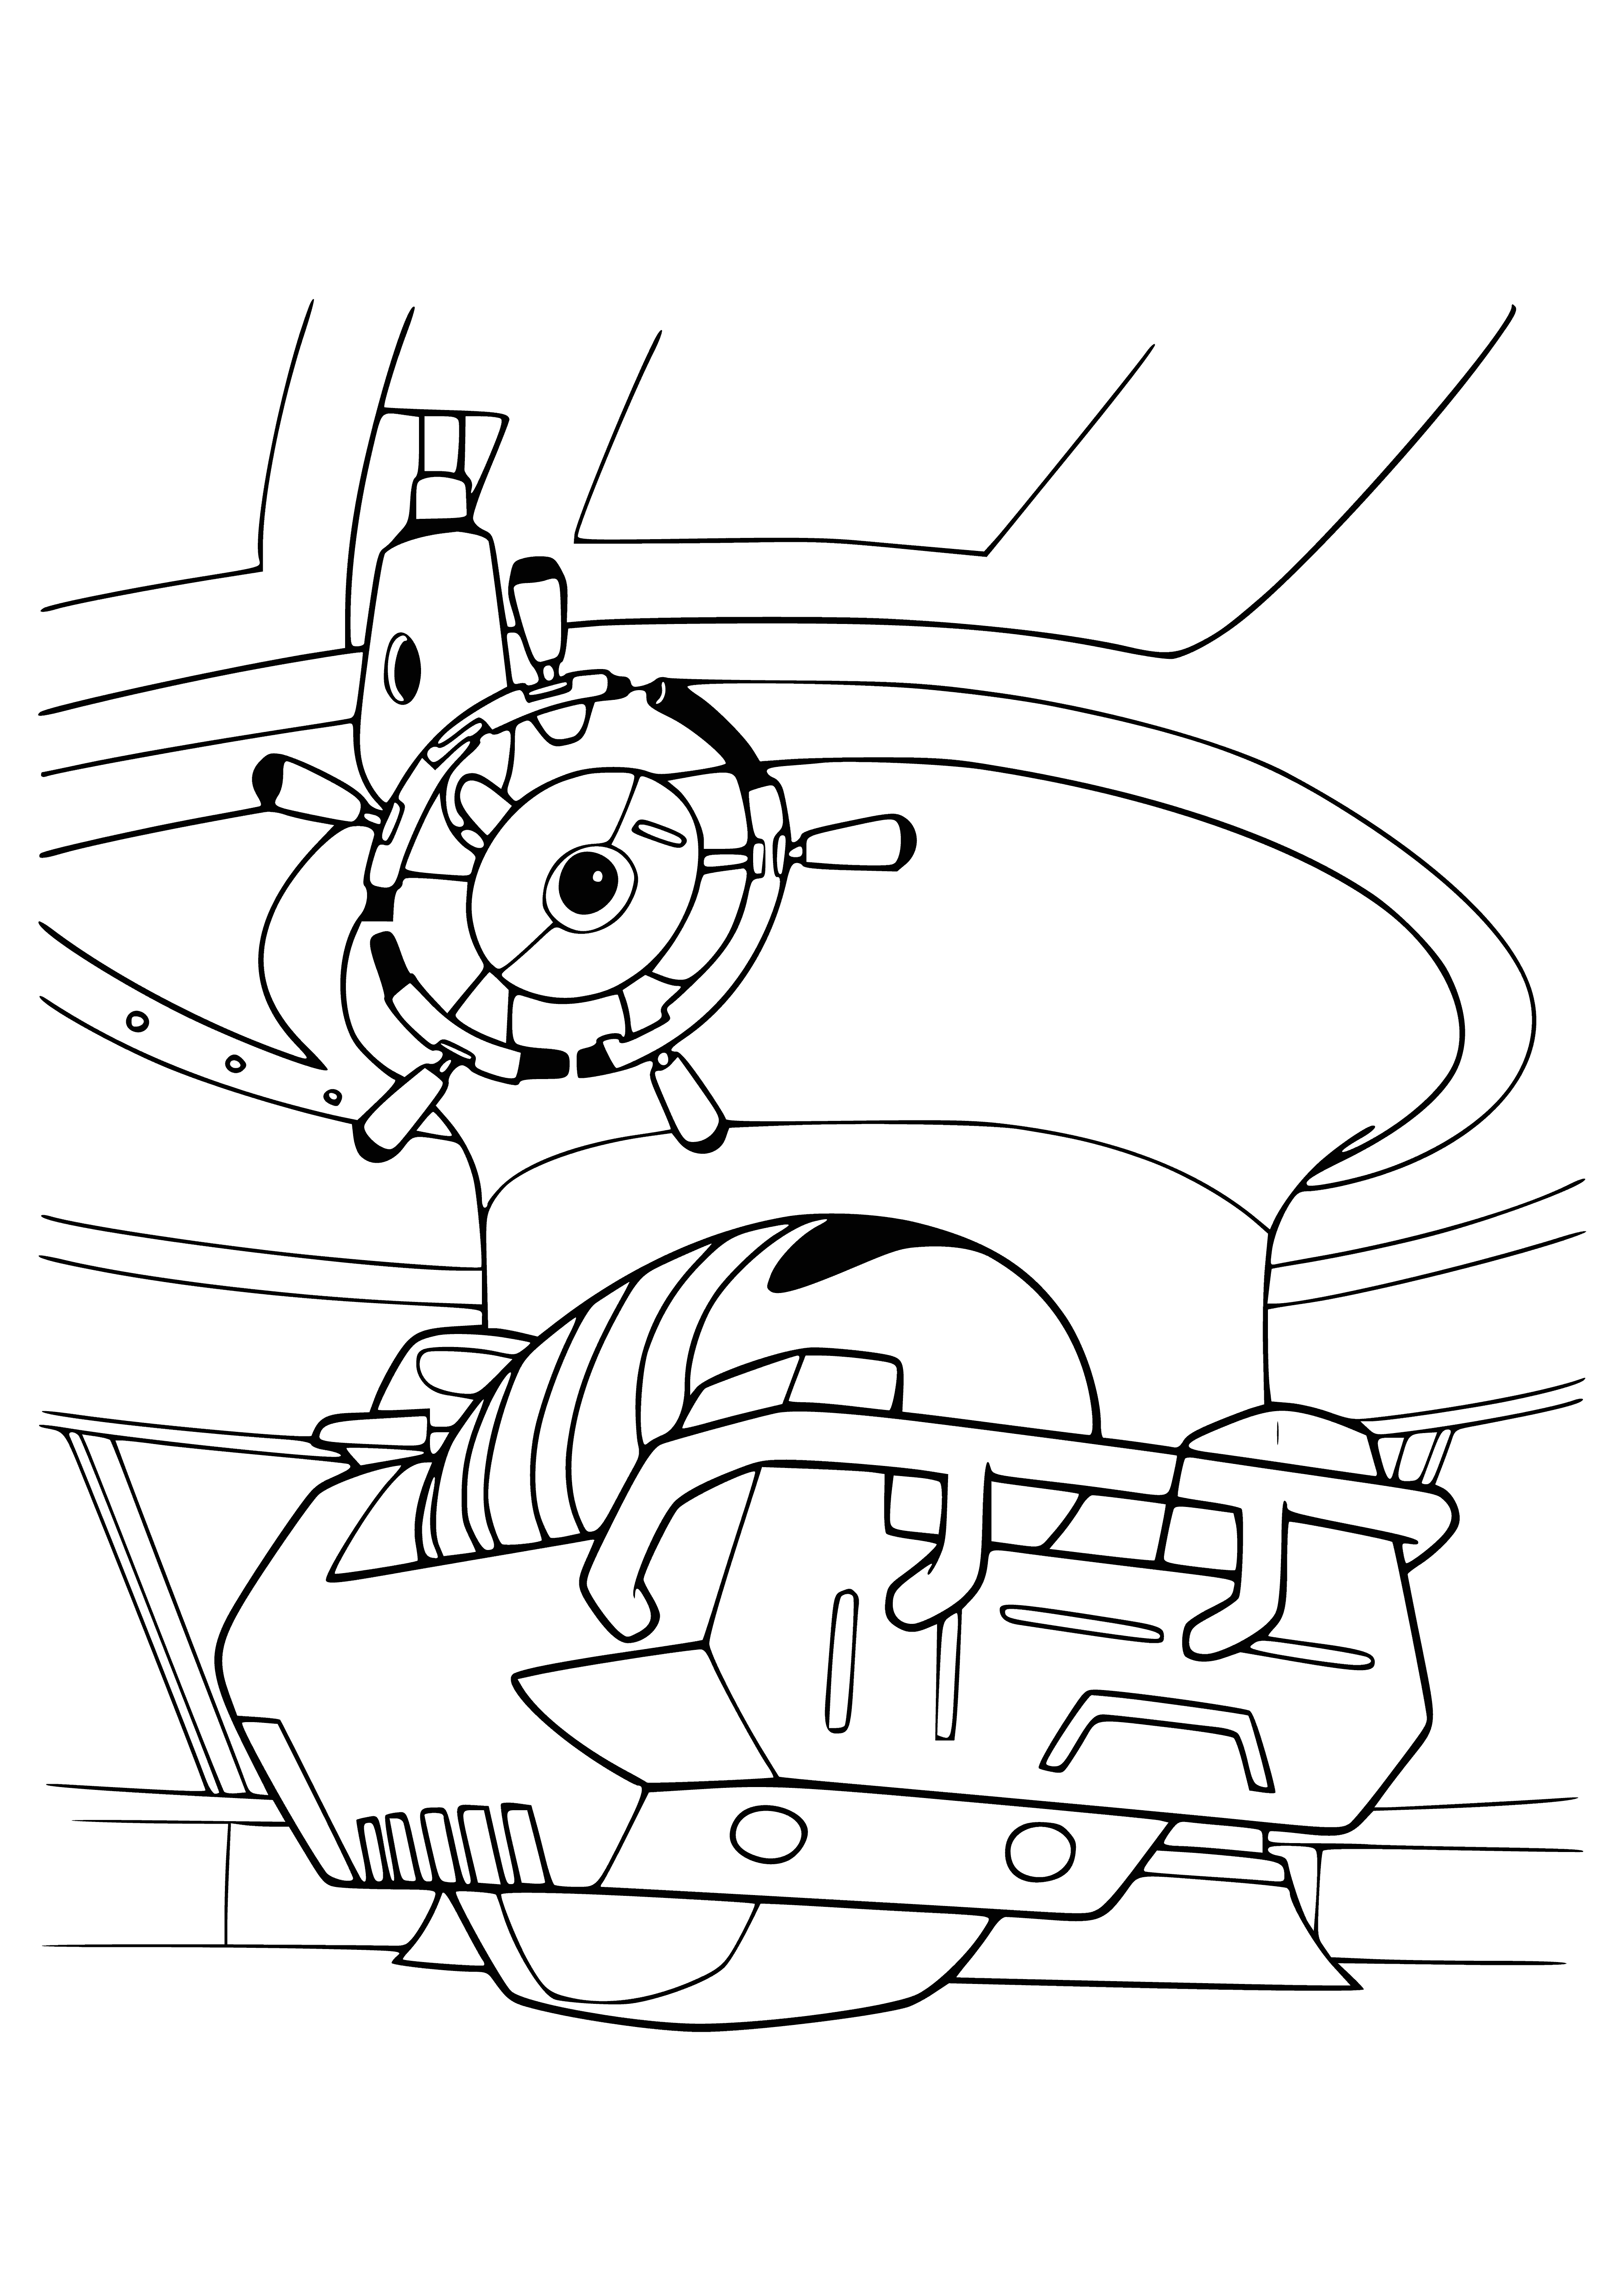 coloring page: Wall-e's main computer is powerful, able to process large amounts of data & communicate with other machines in its world.